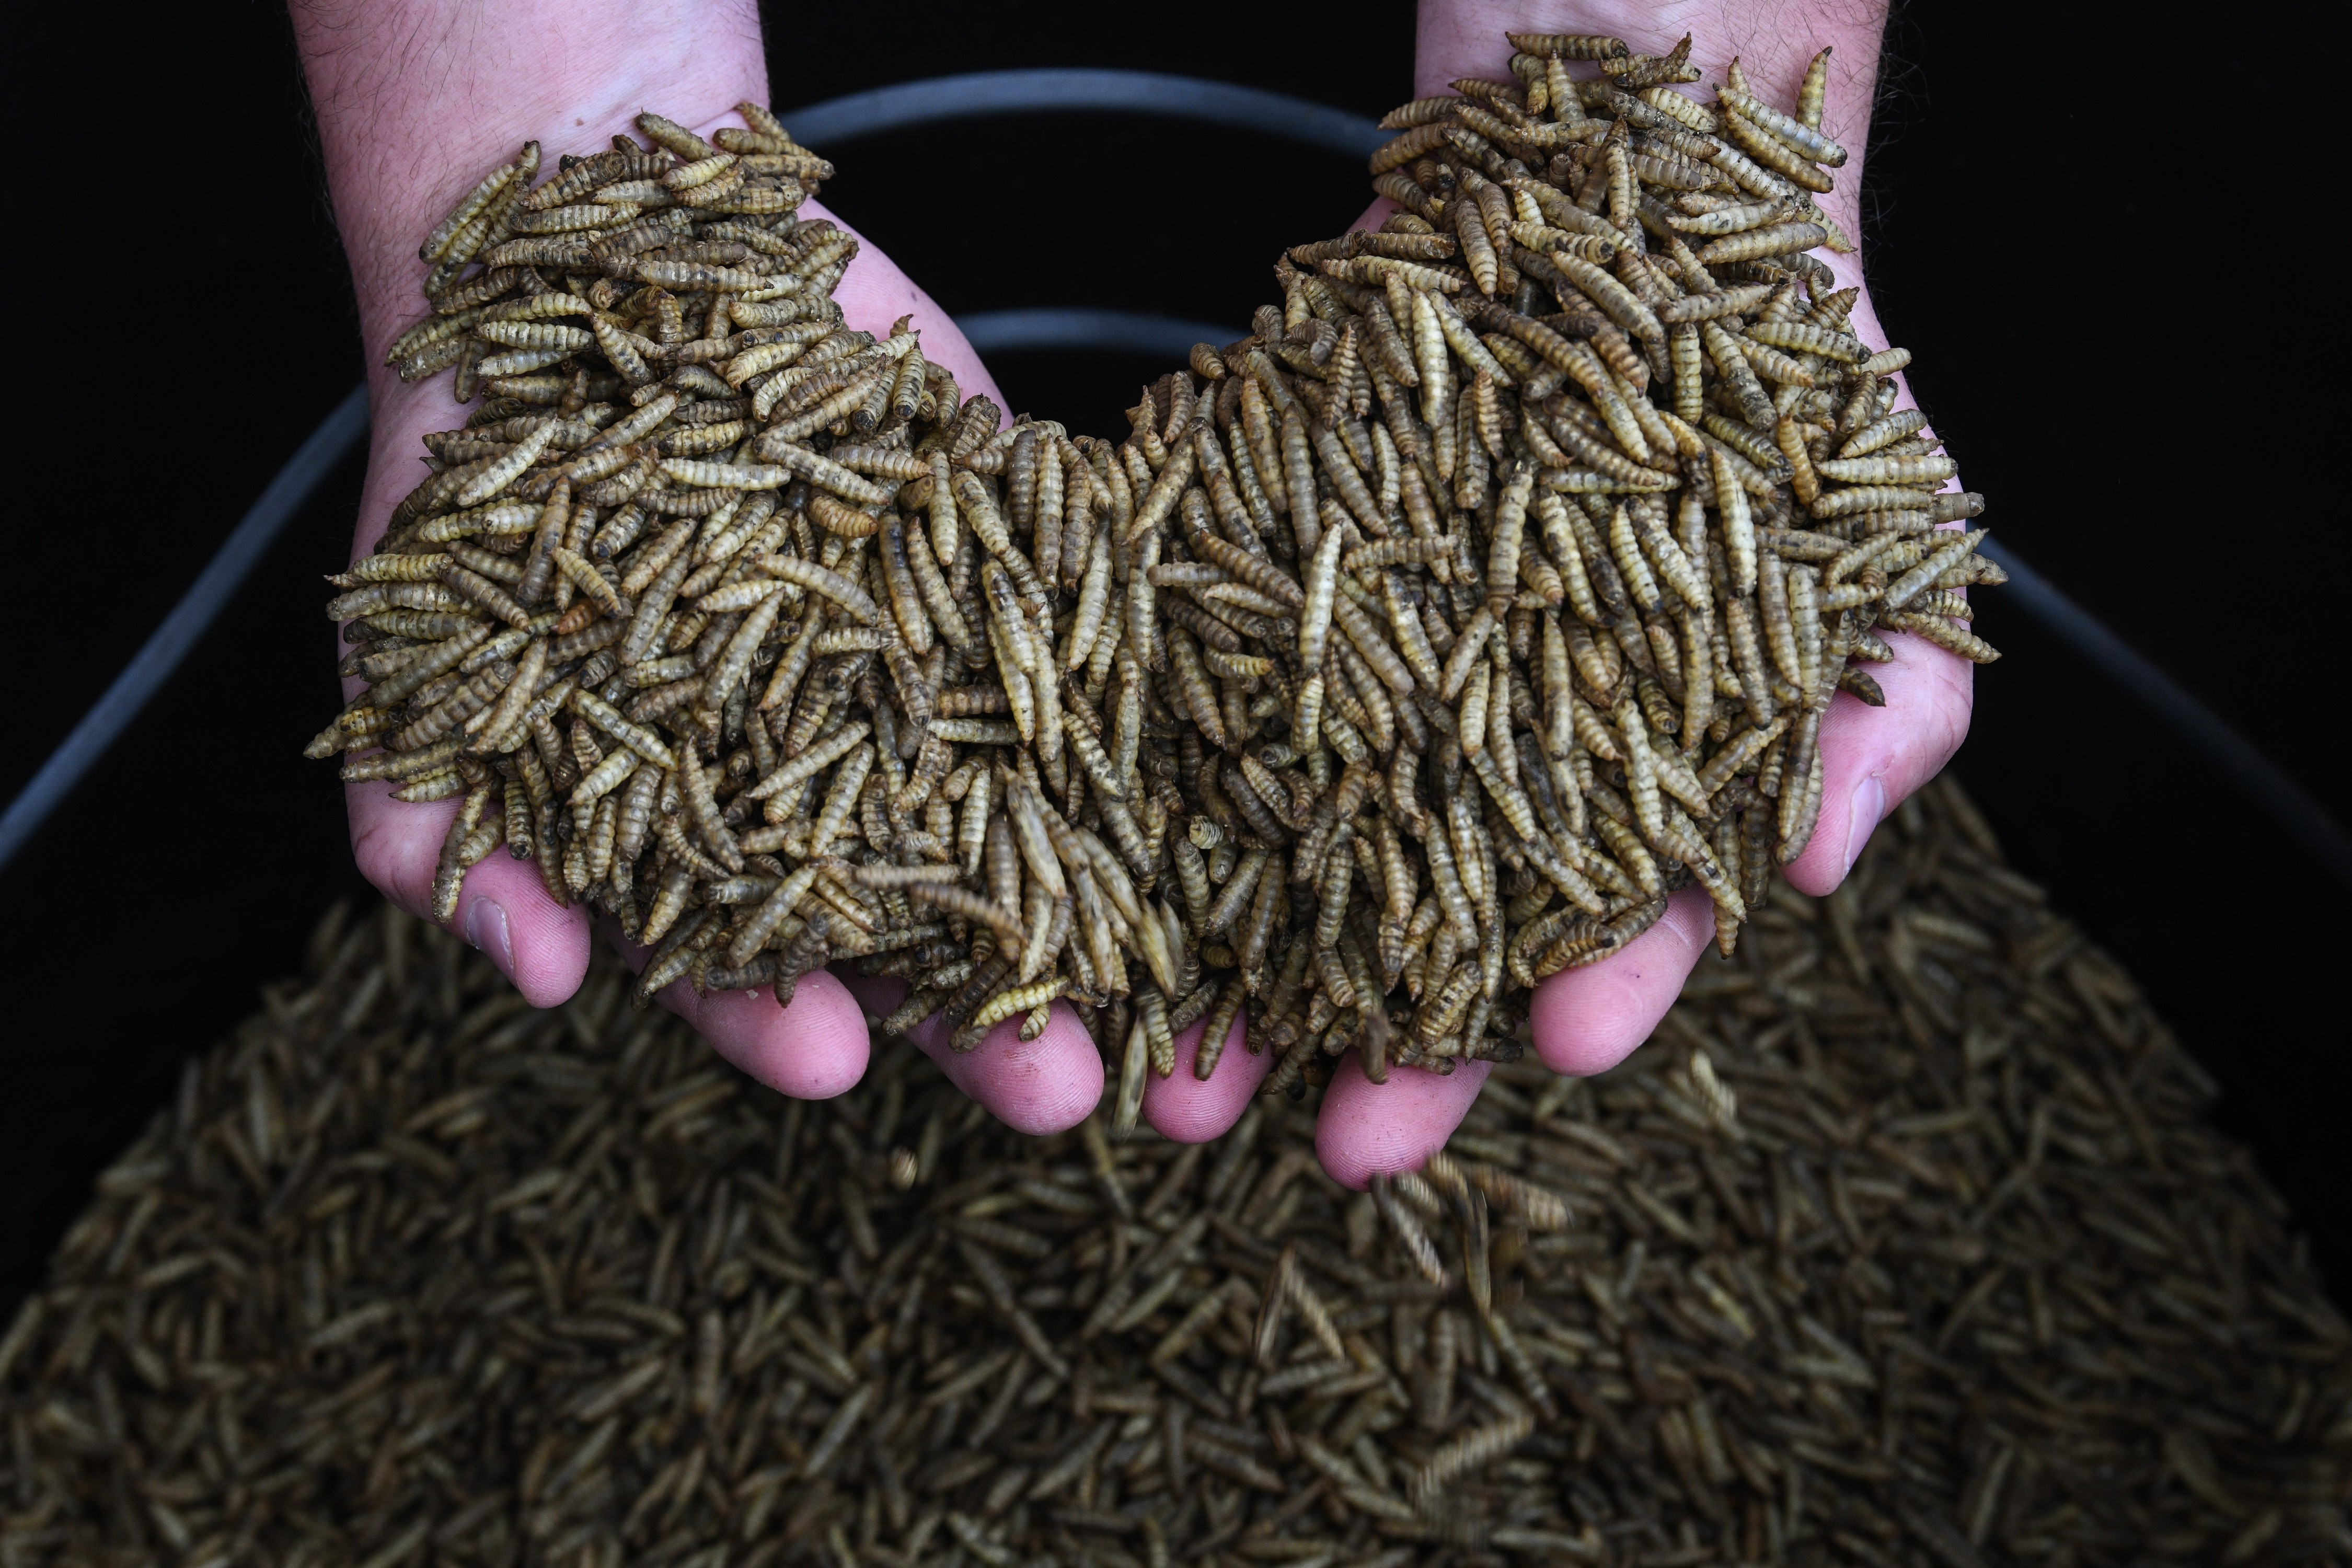 Dried black soldier fly larvae at Evo Conversion Systems, in Texas, in the United States. Photo: The Washington Post / Loren Elliot